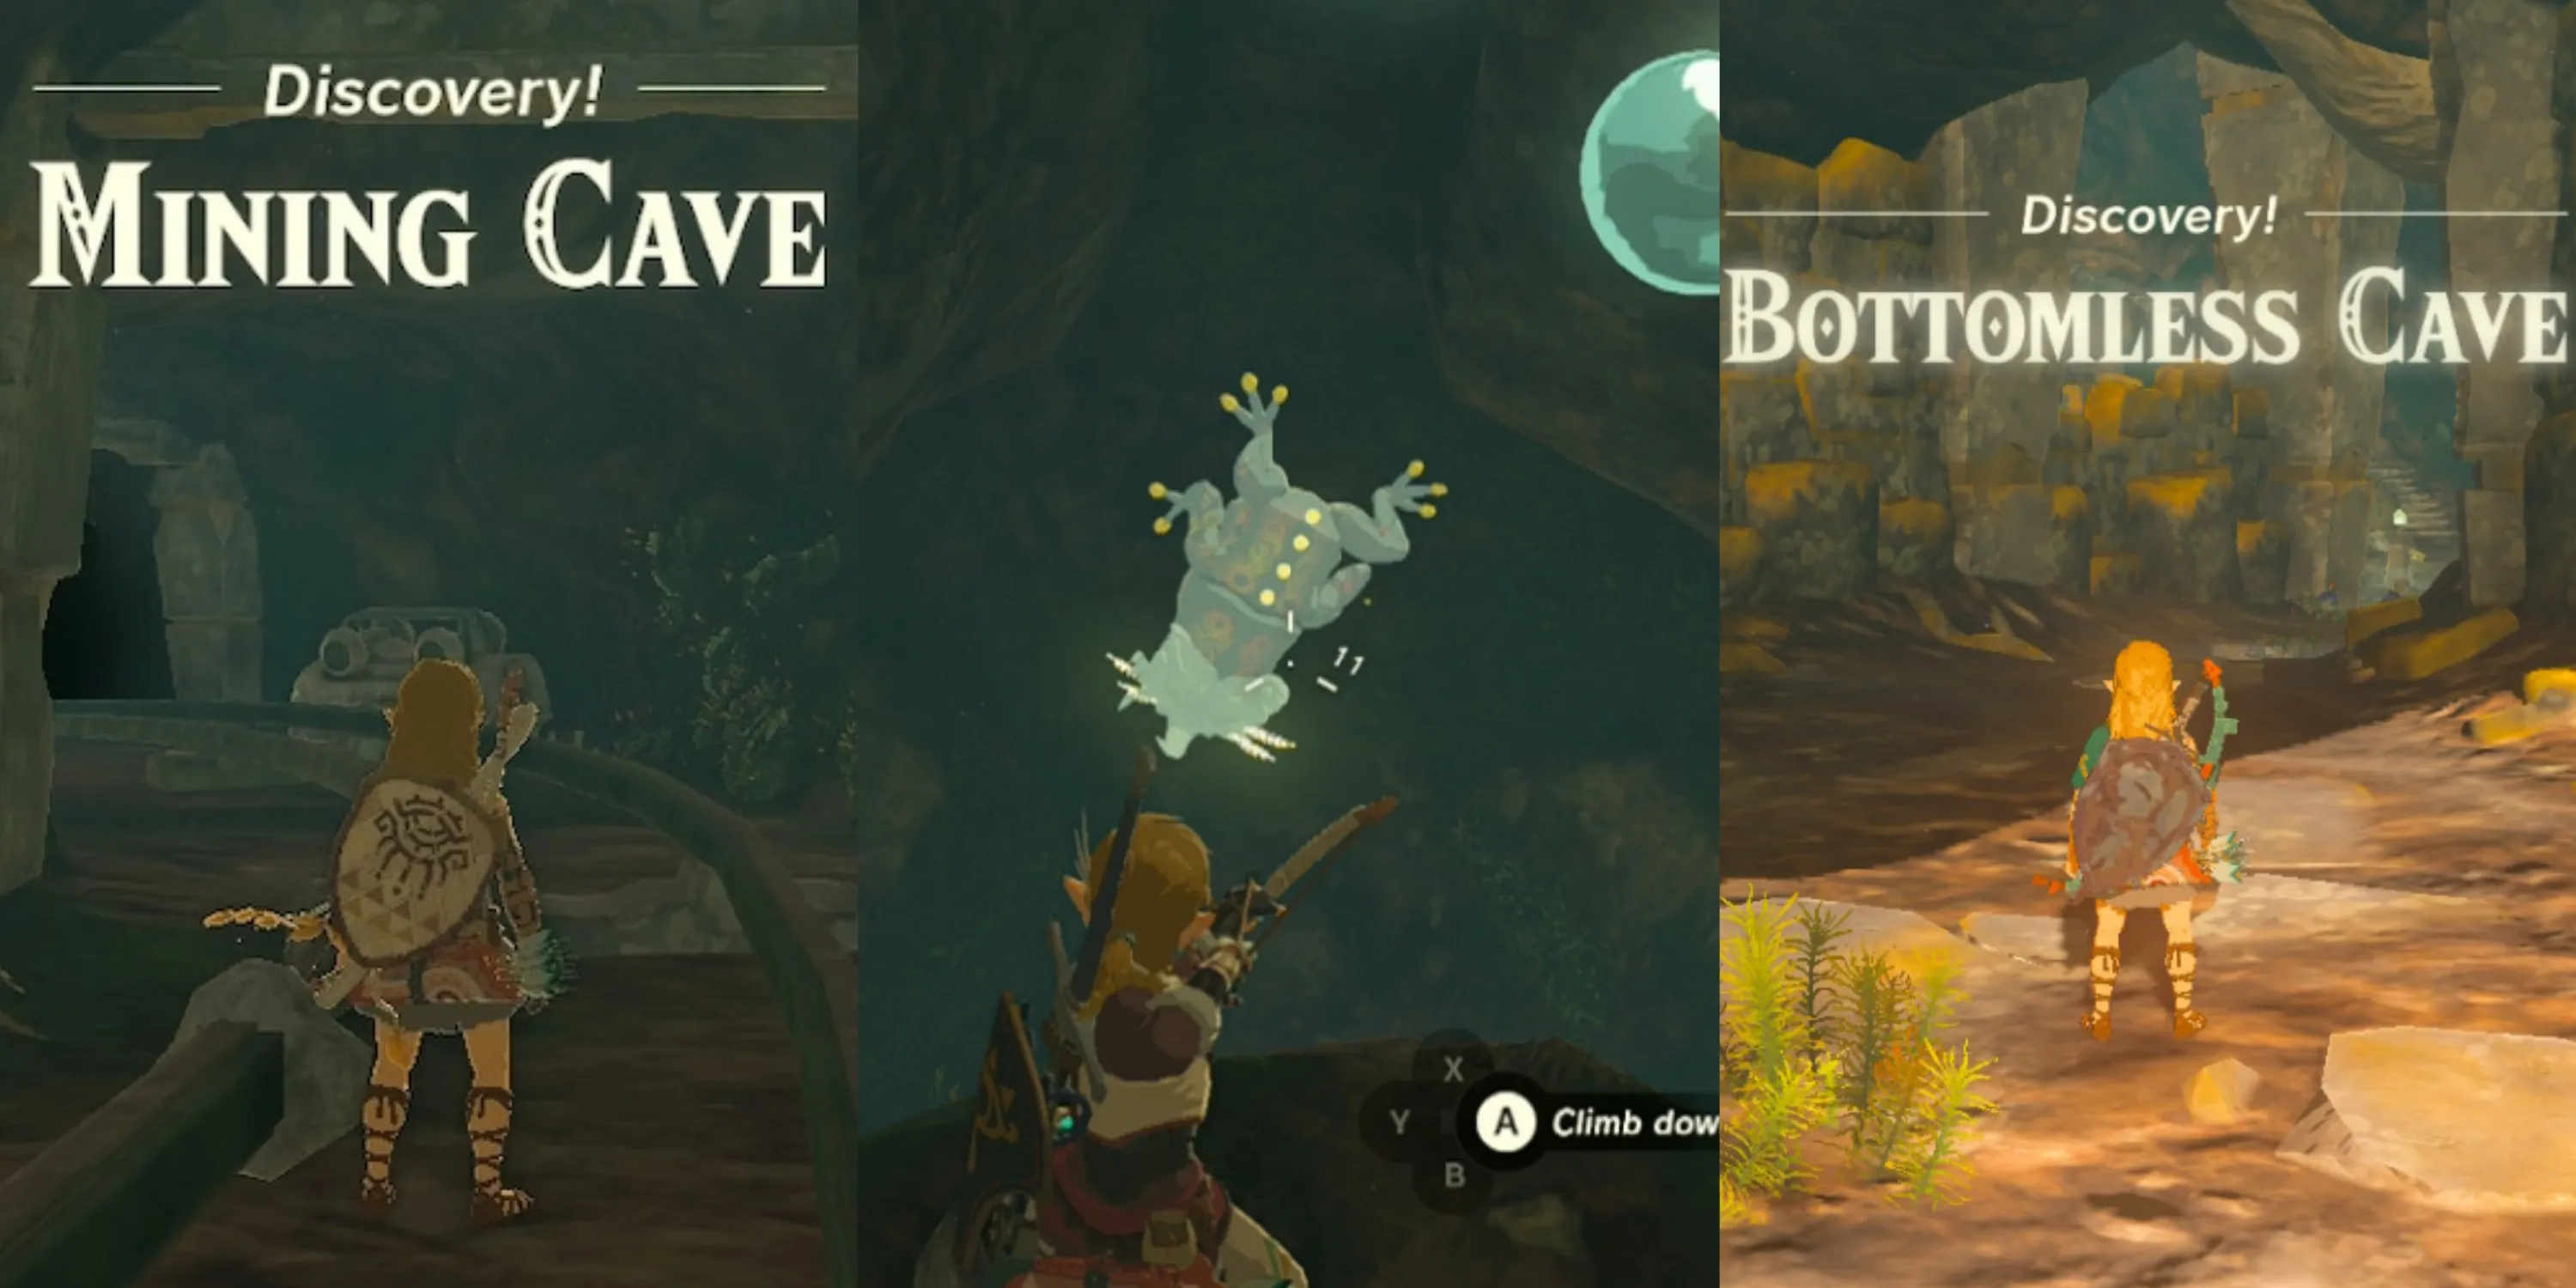 Discovering the mining cave, finding a Bubblefrong on the walls of the pit cave and discoverying the bottomless cave